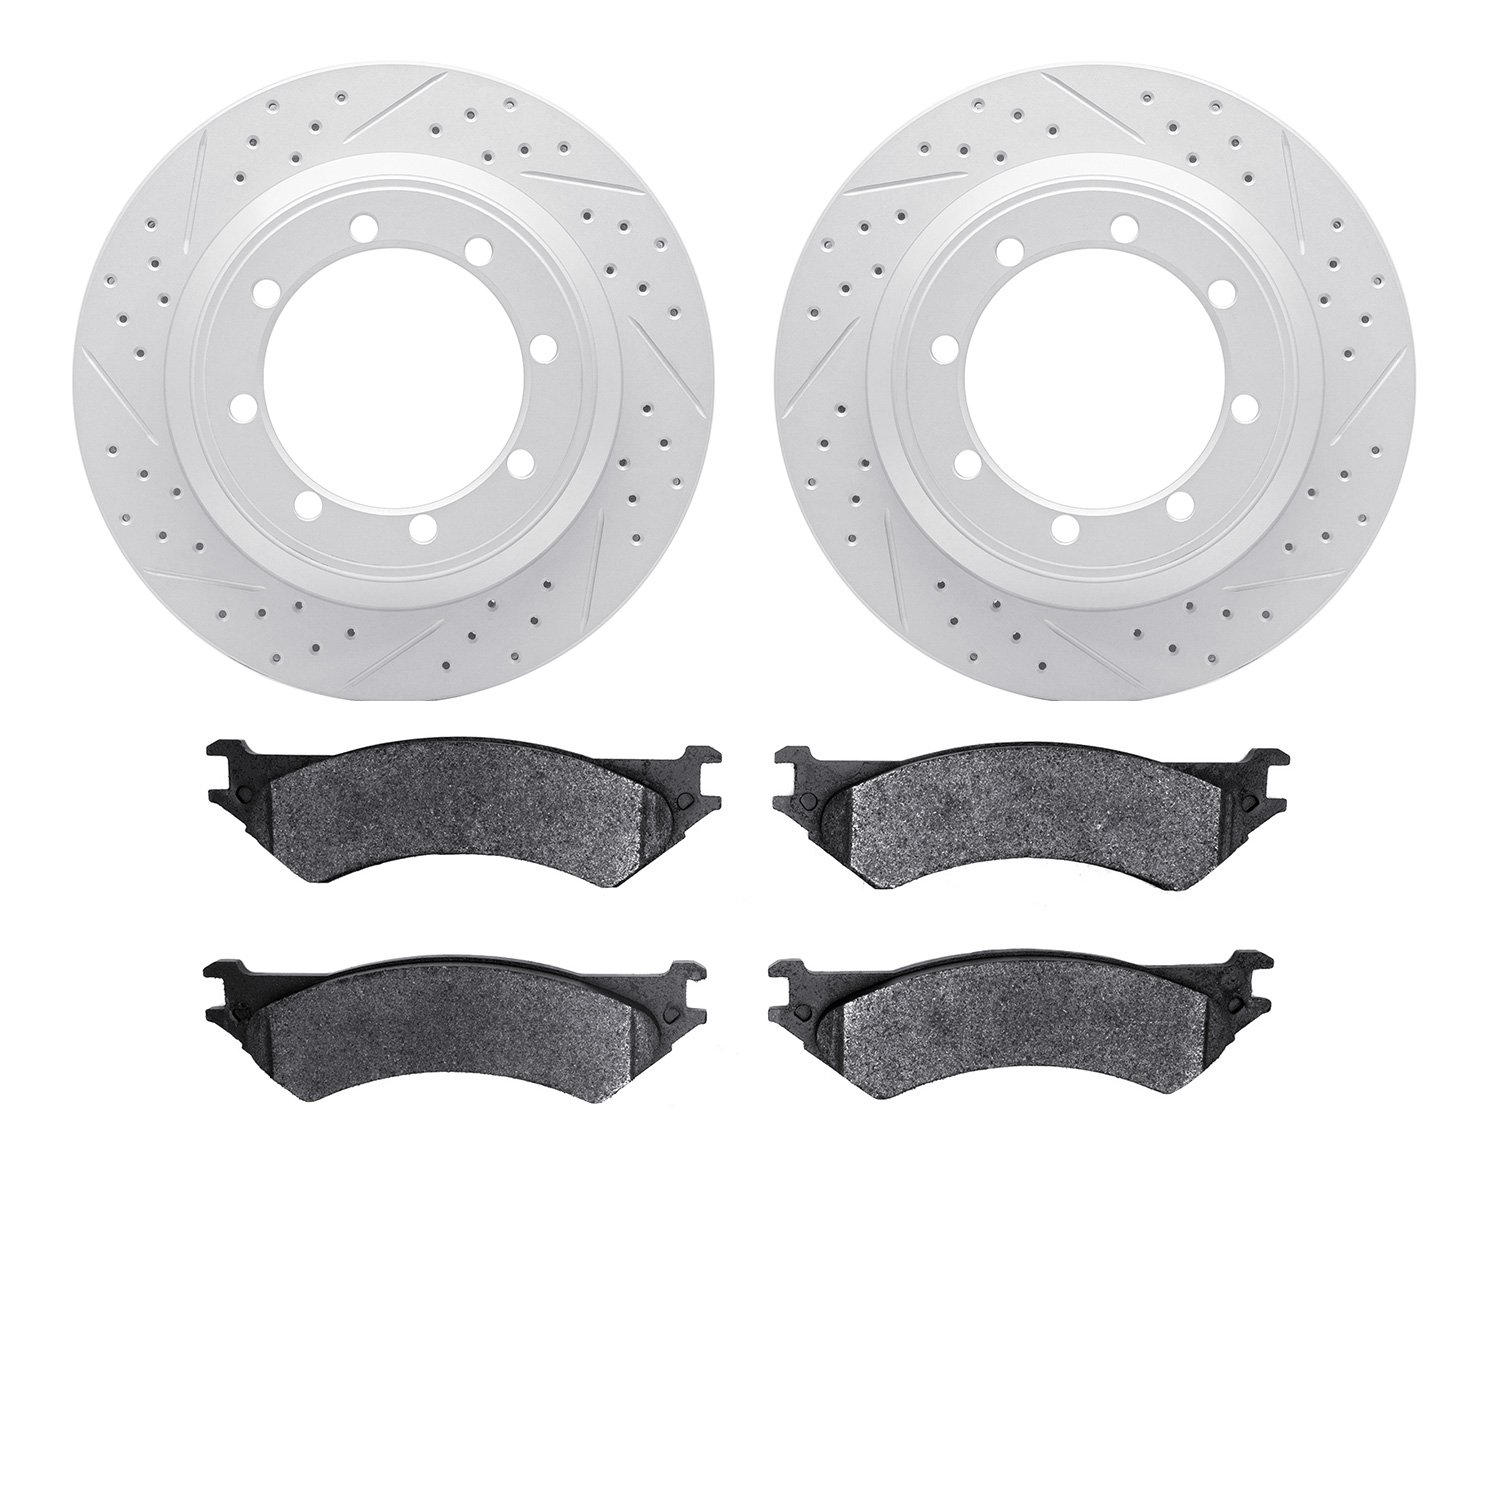 2402-54030 Geoperformance Drilled/Slotted Brake Rotors with Ultimate-Duty Brake Pads Kit, 1999-2007 Ford/Lincoln/Mercury/Mazda,